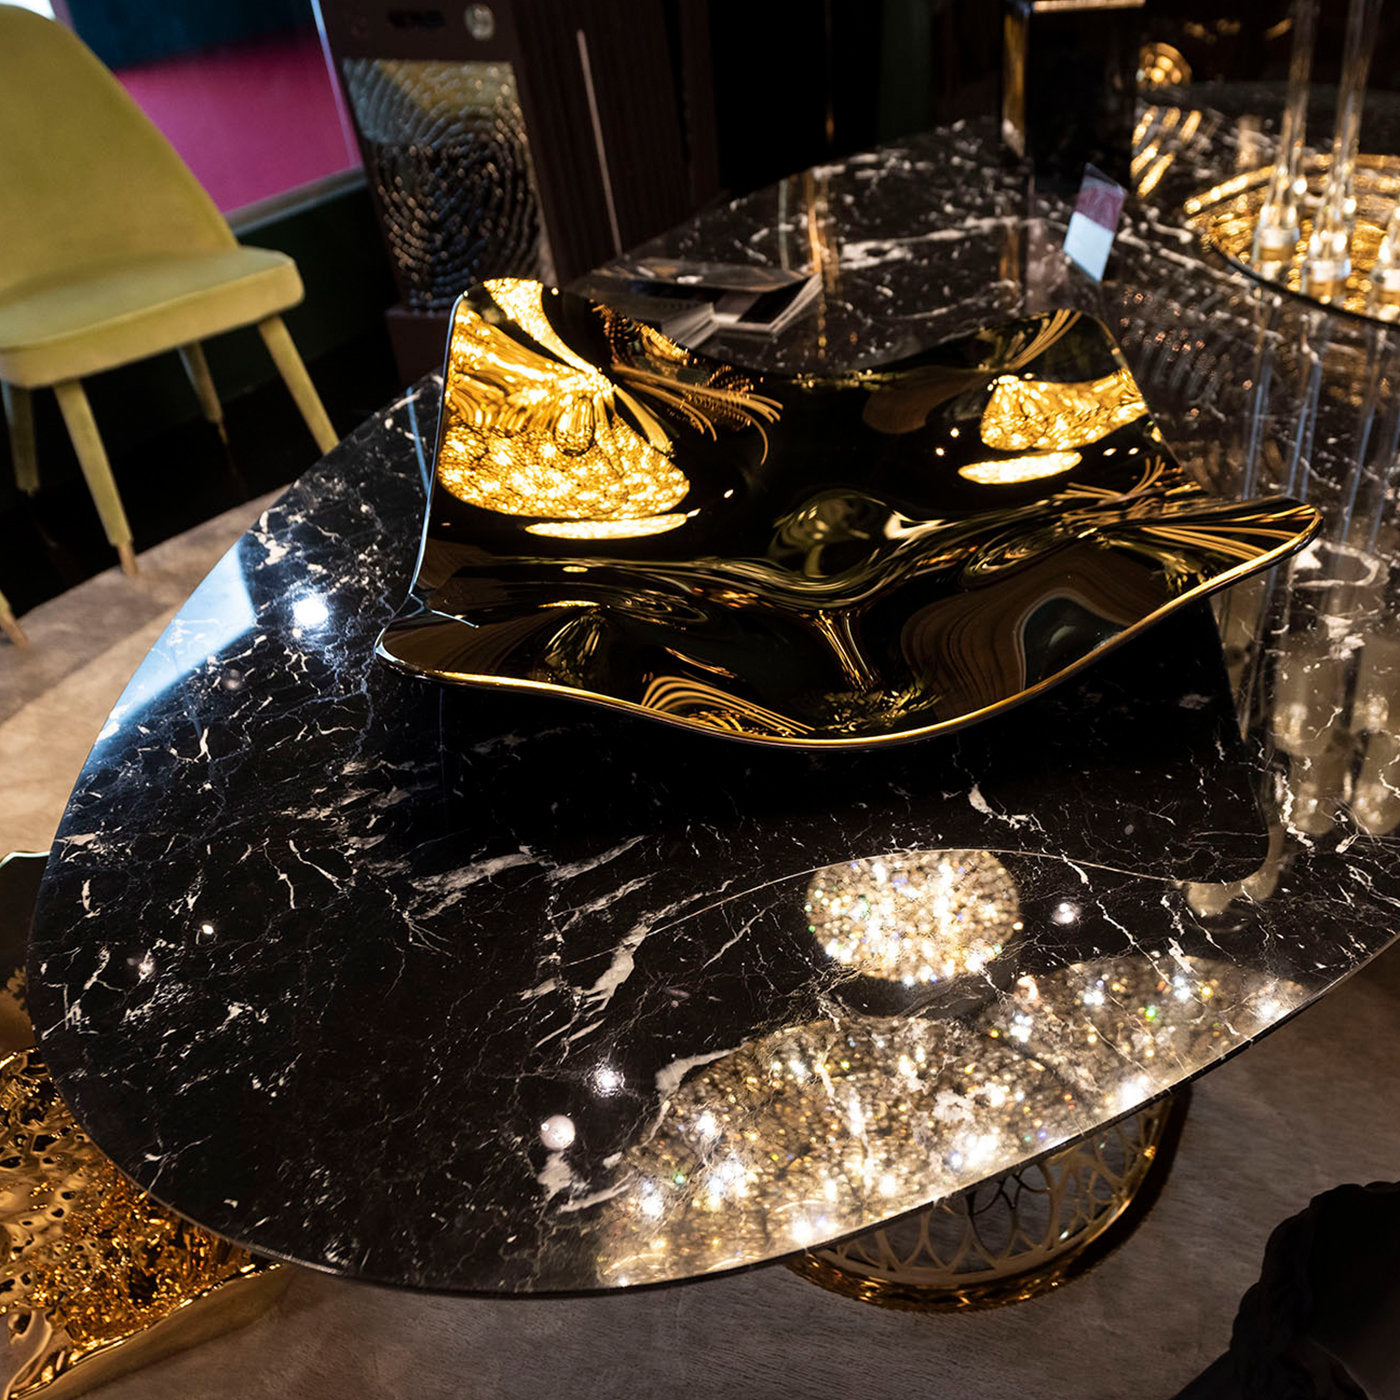 Gatsby Arabesque Table with Black Marquinia Marble Top - Alternative view 1